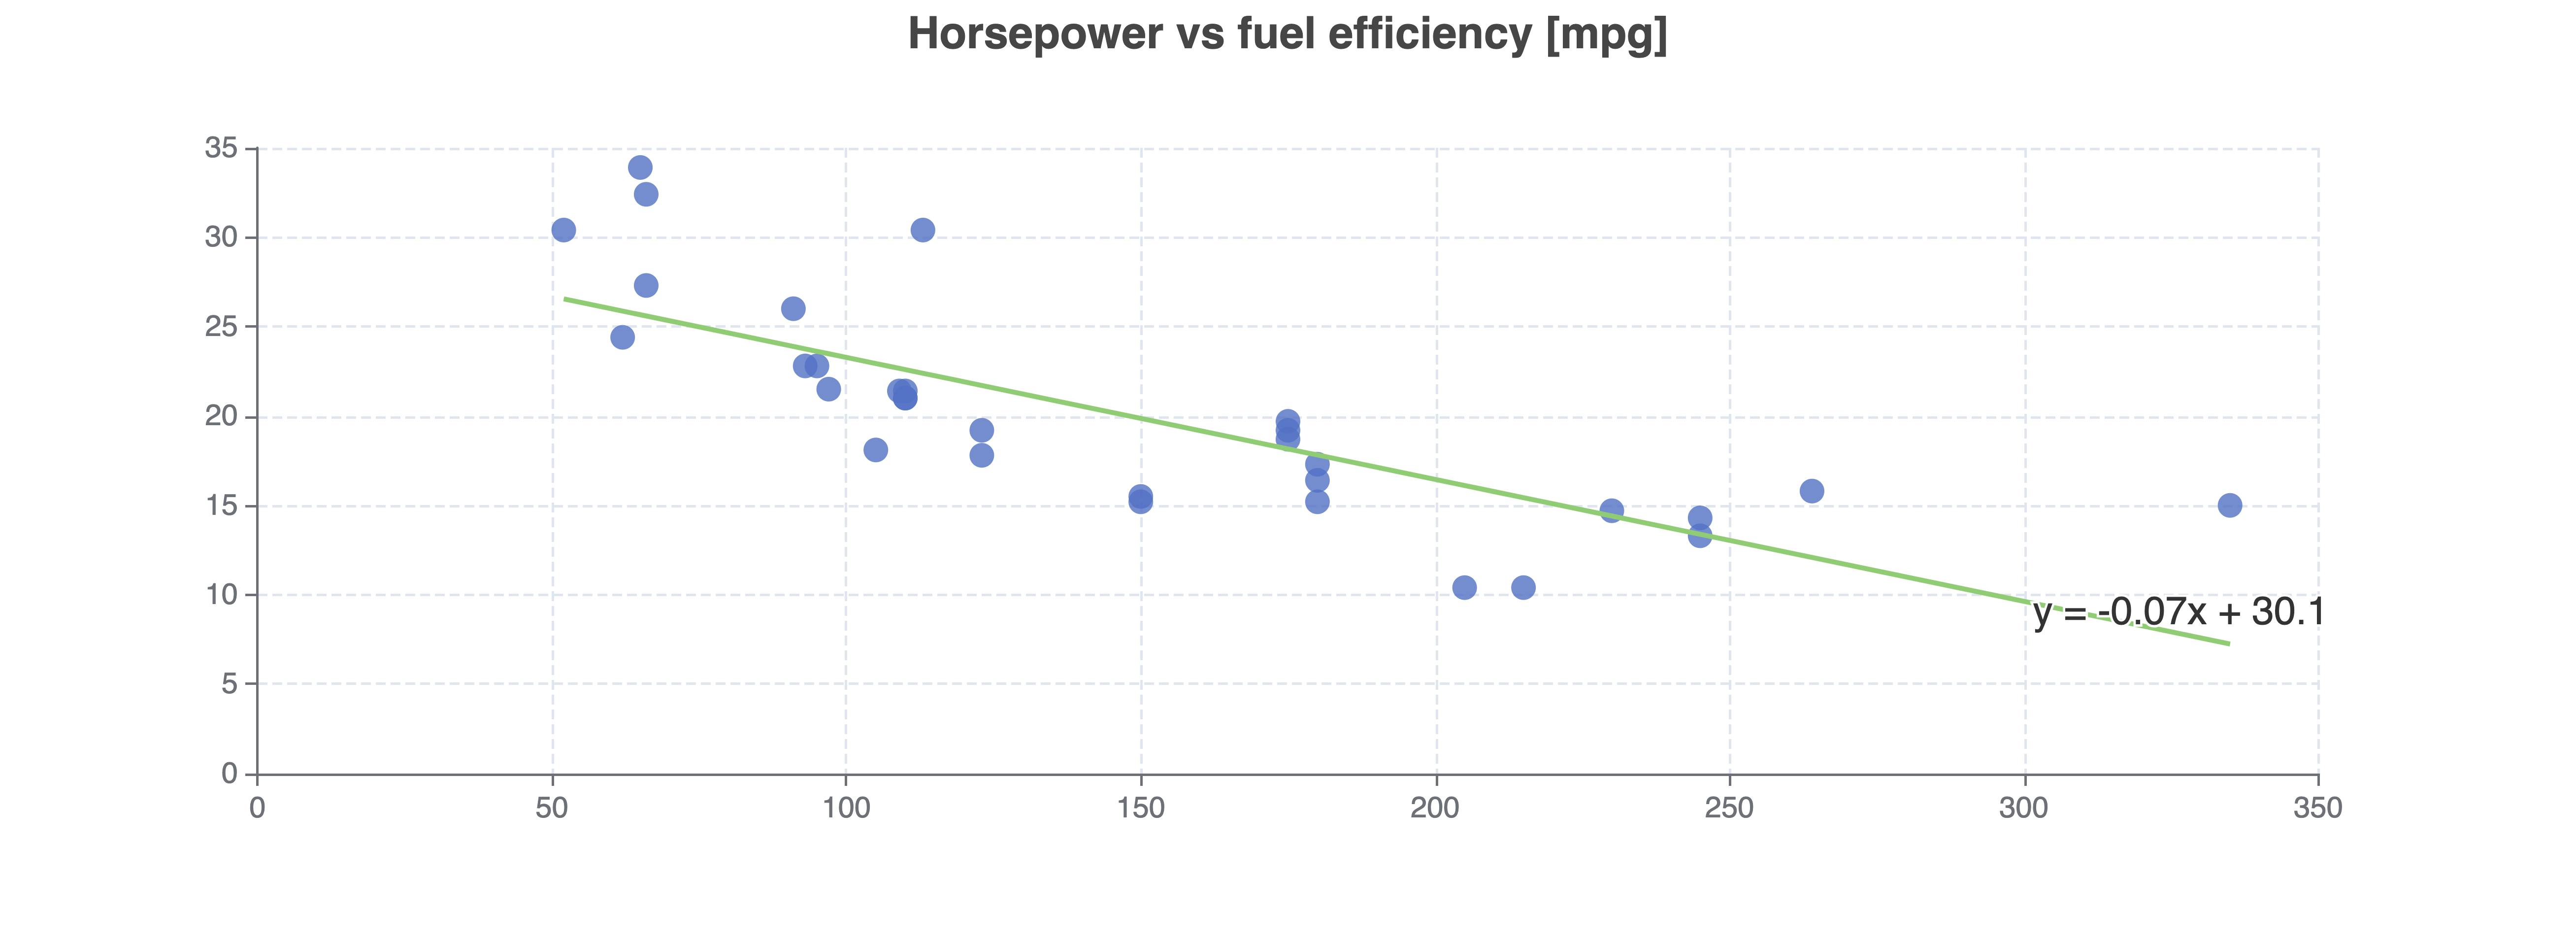 Regression fit on horsepower vs fuel efficiency for cars in the mtcars data set.